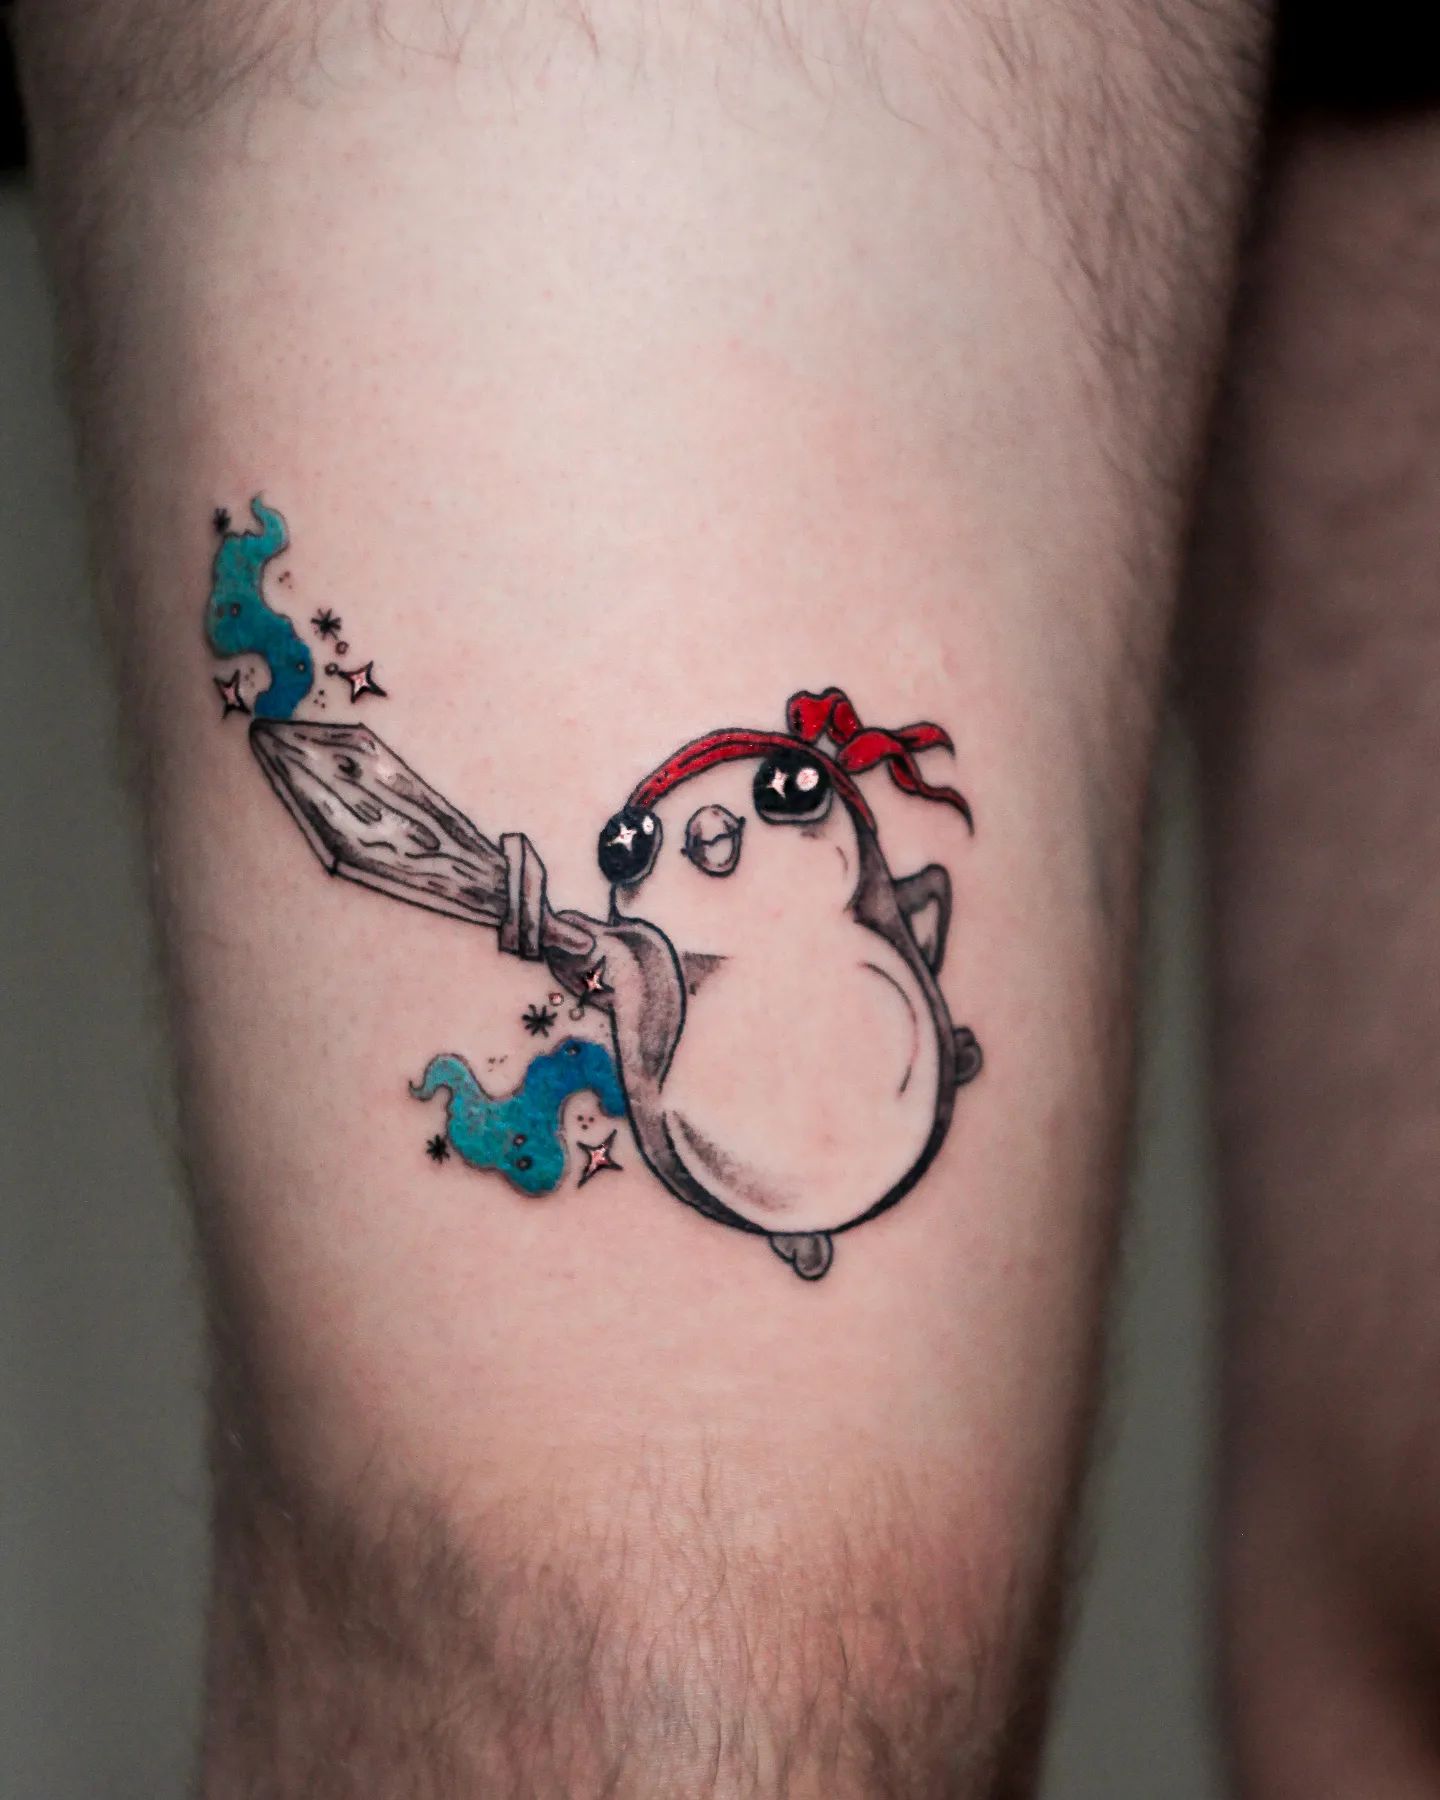 Penguins can fight, too! Show that they are the true warriors by using some colorful inks to make your tattoo lively.